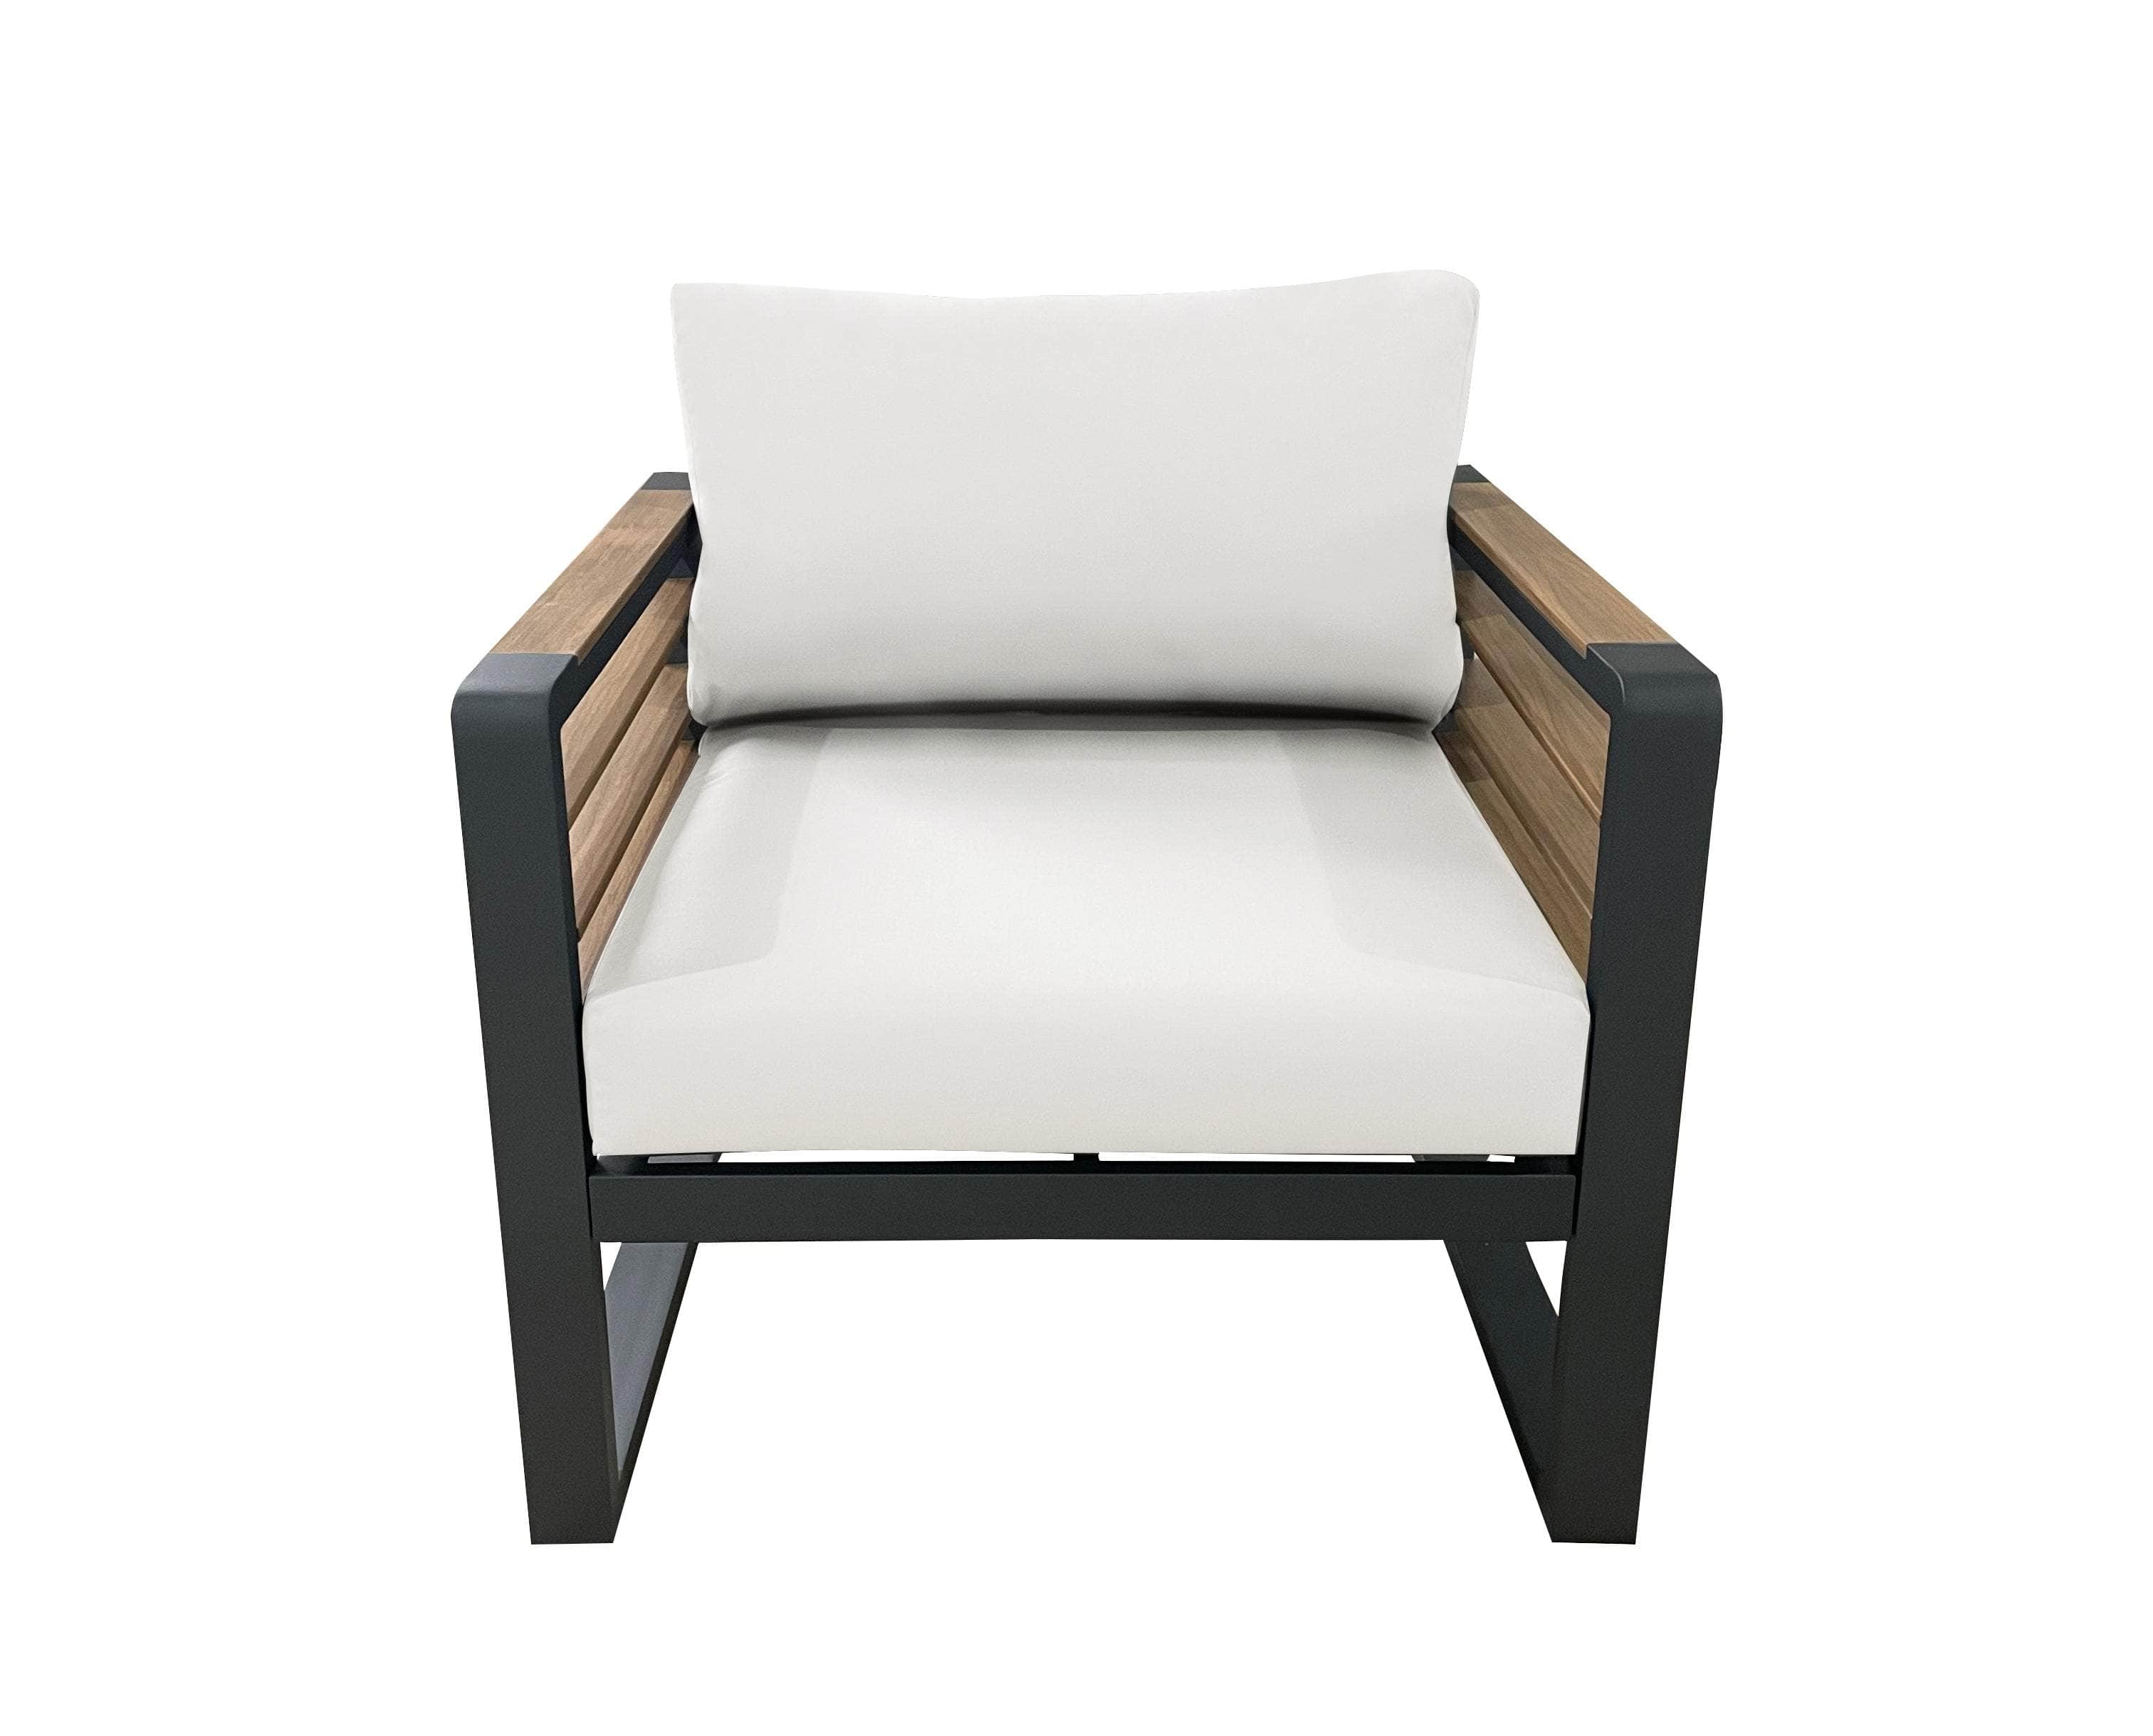 CIEUX Club Chair Canvas Natural Avignon Outdoor Patio Aluminum Metal Club Chair in Black with Sunbrella Cushions - Available in 2 Colours